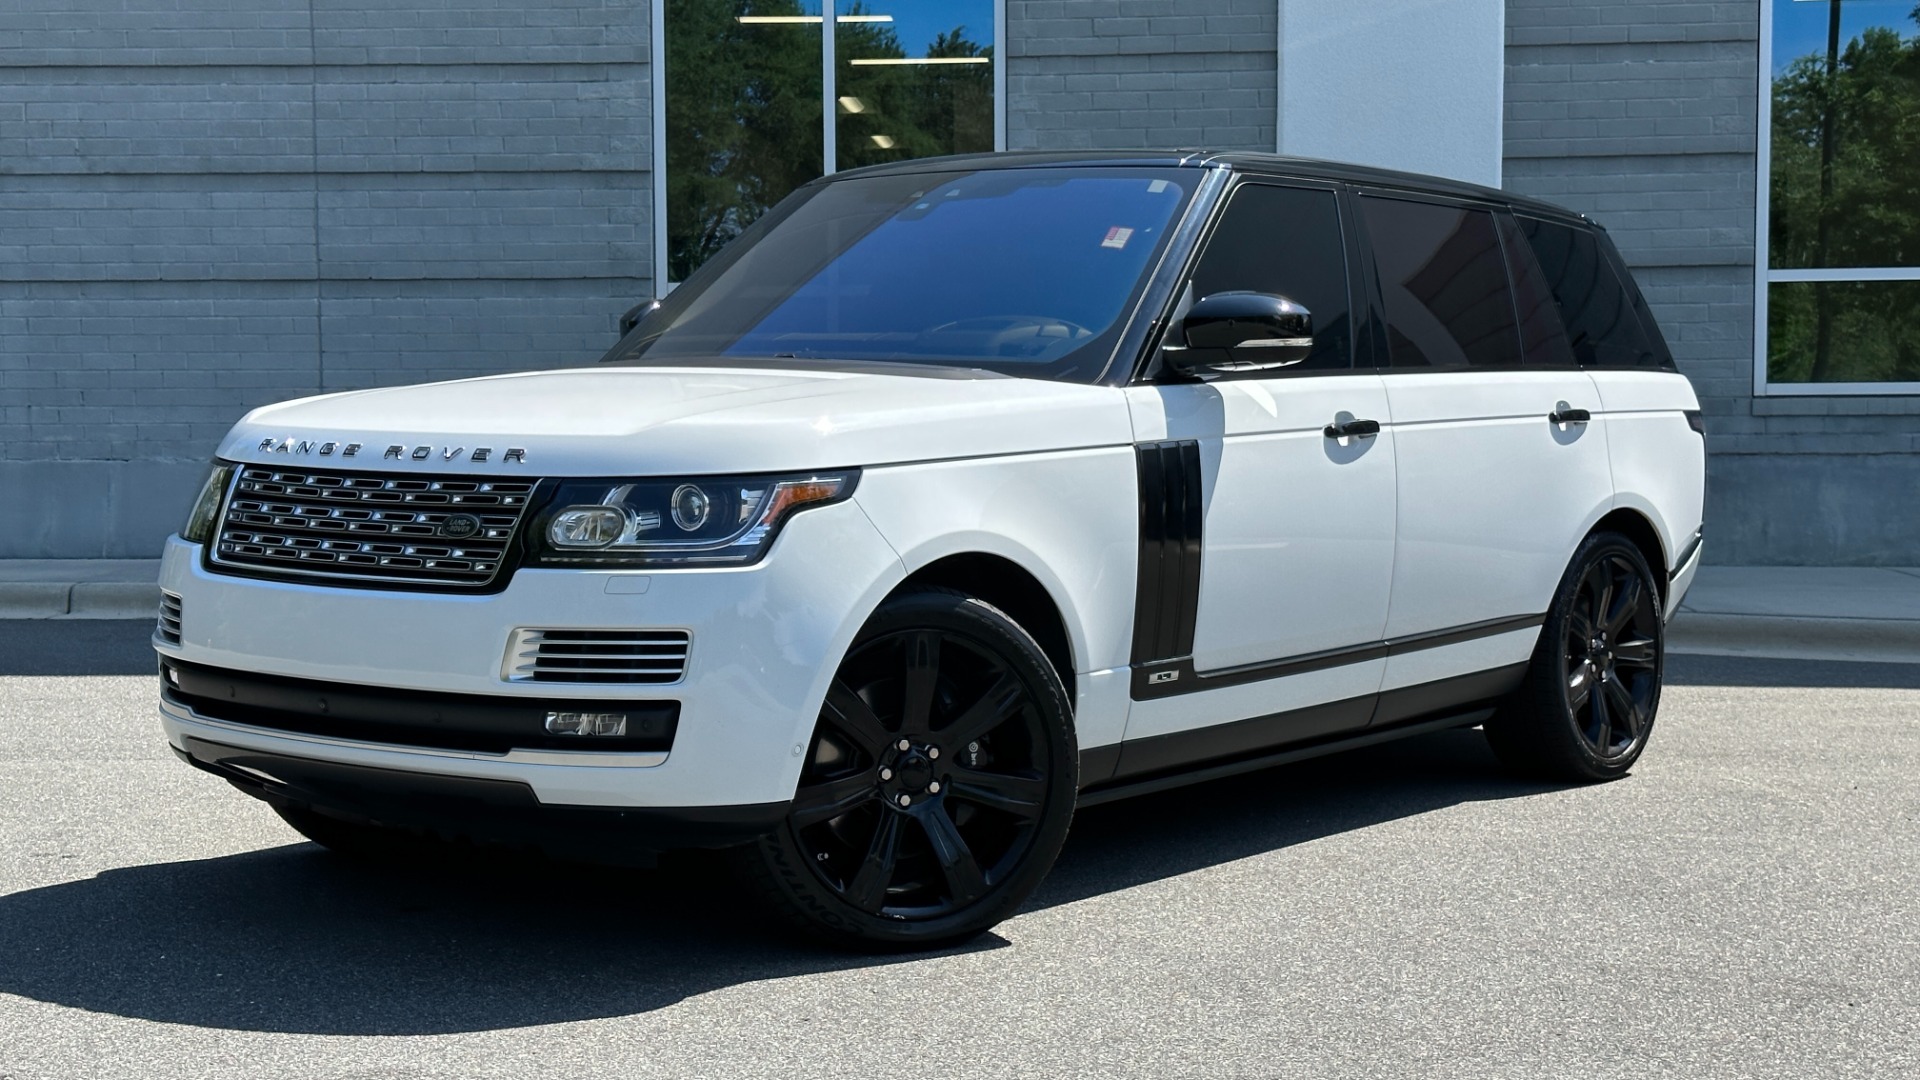 Used 2017 Land Rover Range Rover SV AUTOBIOGRAPHY / LOADED / REAR MASSAGE / EXECUTIVE SEATING / LWB for sale $75,900 at Formula Imports in Charlotte NC 28227 1